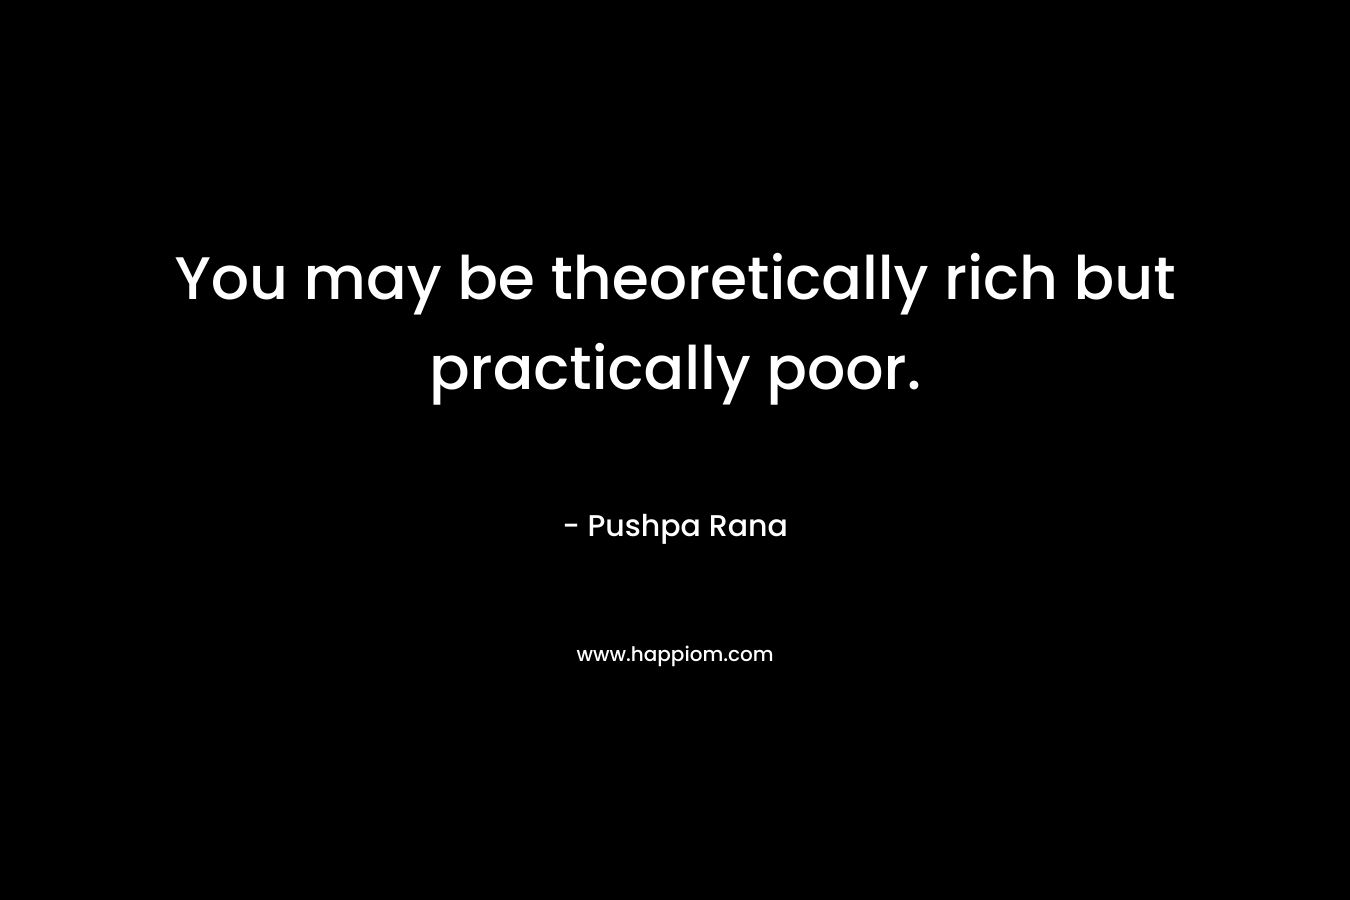 You may be theoretically rich but practically poor.